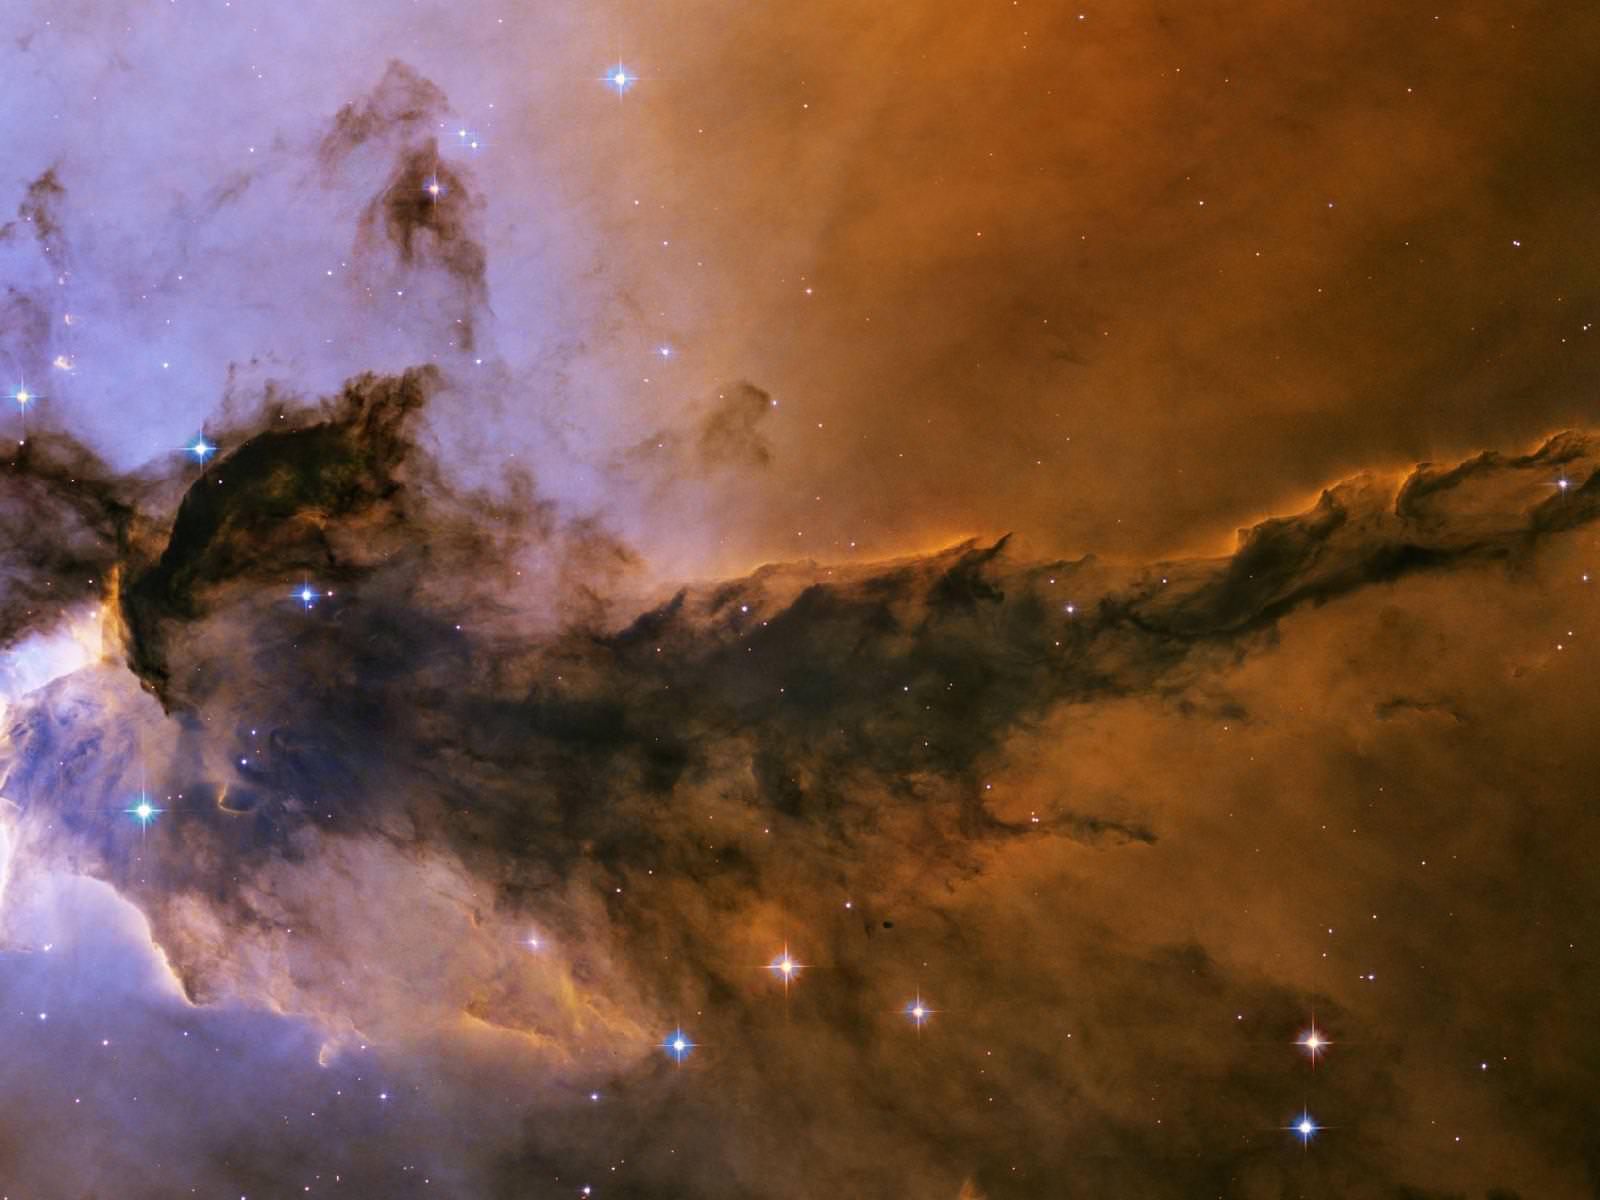 Nebulae: What Are They And Where Do They Come From? - Universe Today